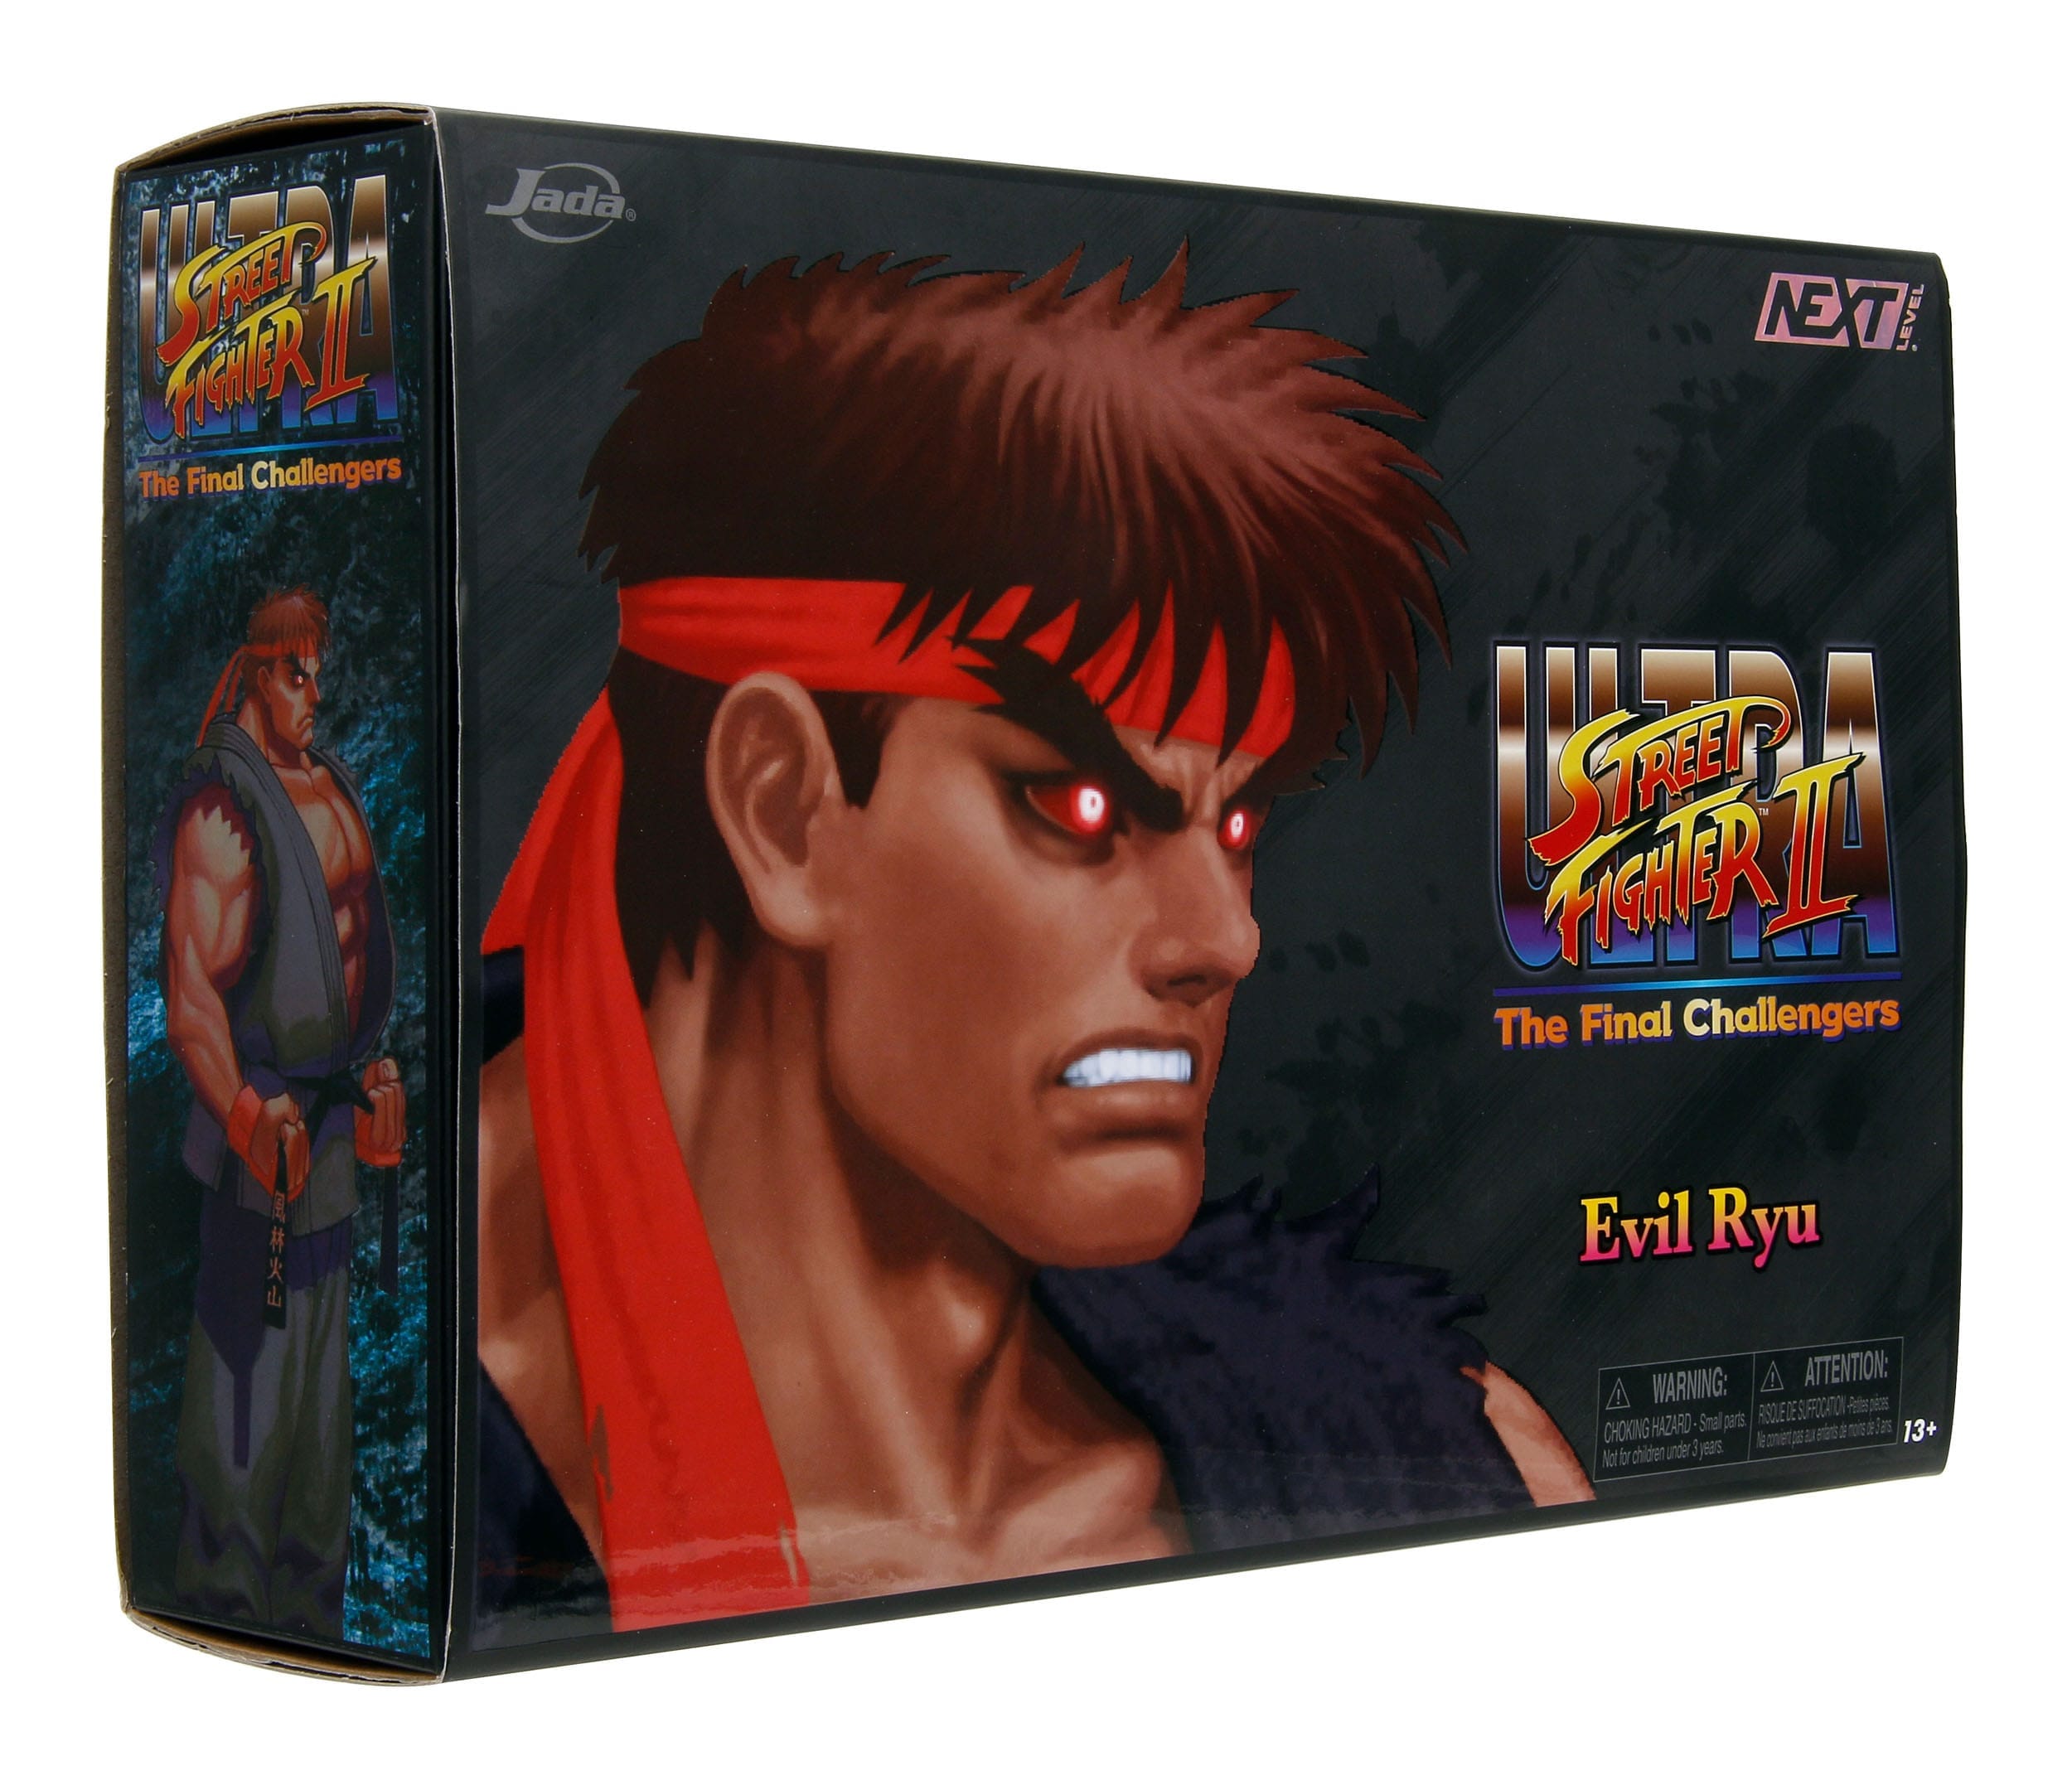 Jada Toys 1/12 Ultra Street Fighter II: The Final Challengers - Ryu (Player  2 Colour Limited ver) (in stock)